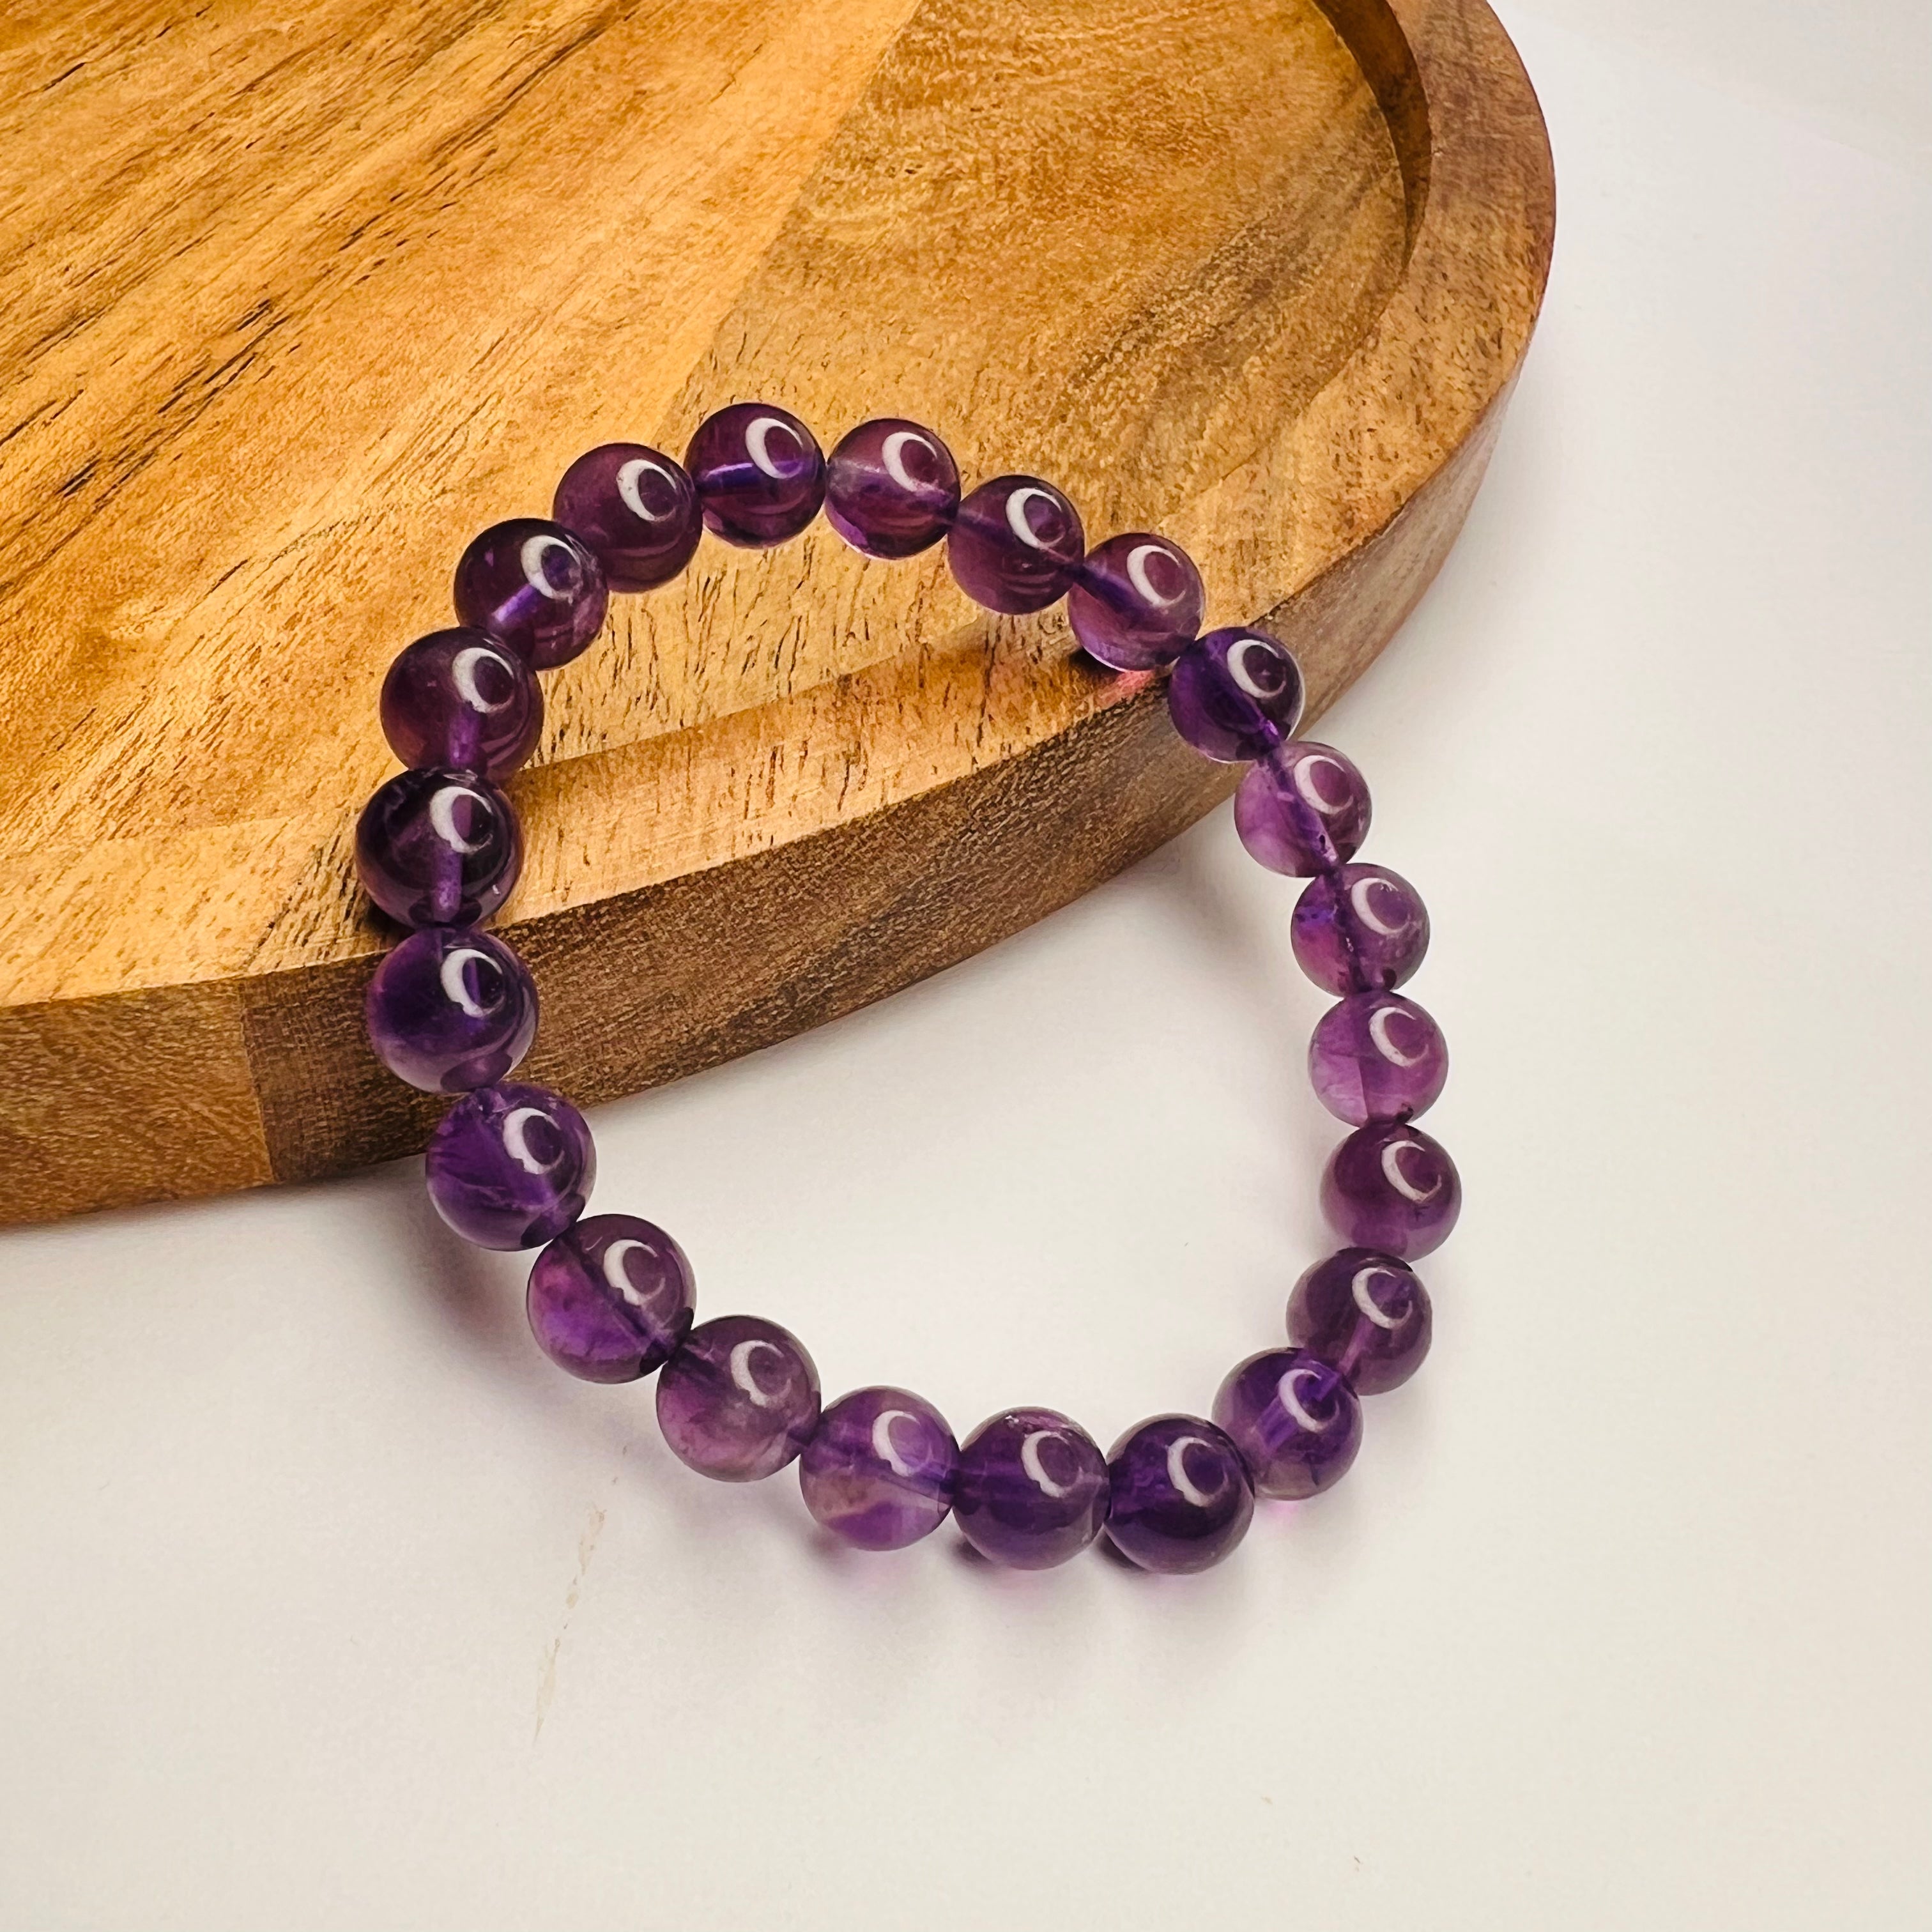 AMETHYST BRACELET - STRESS, RELIEF AND PROTECTION